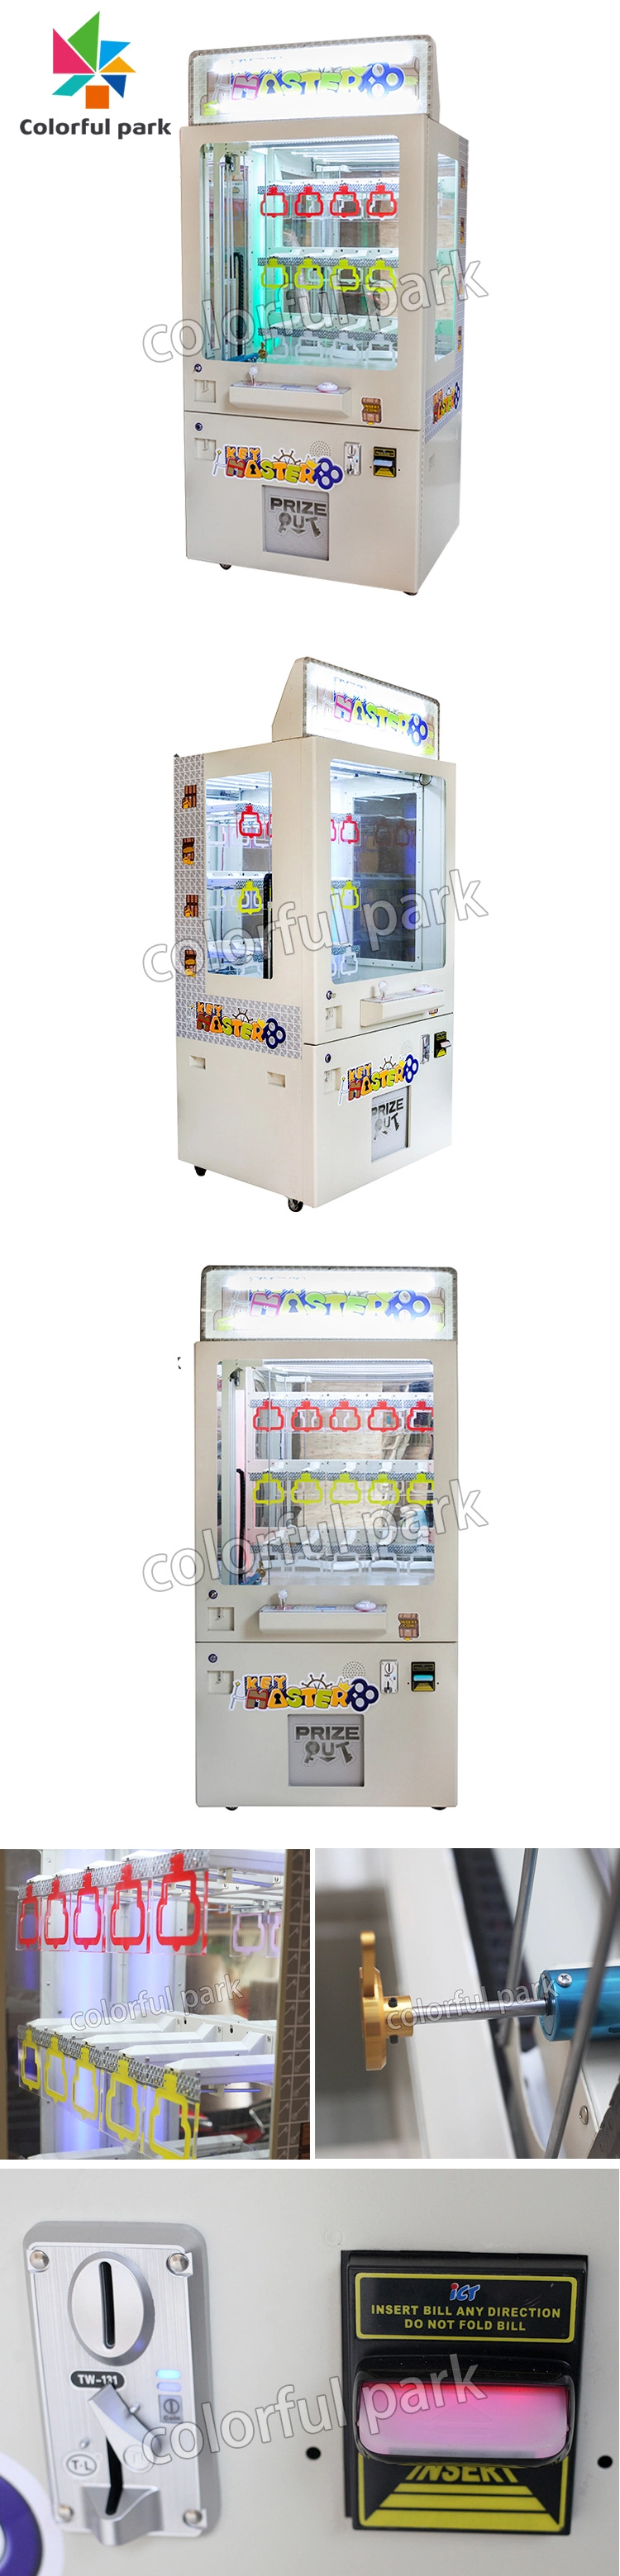 Colorful Park Claw Machine Game Machine Key Master Game